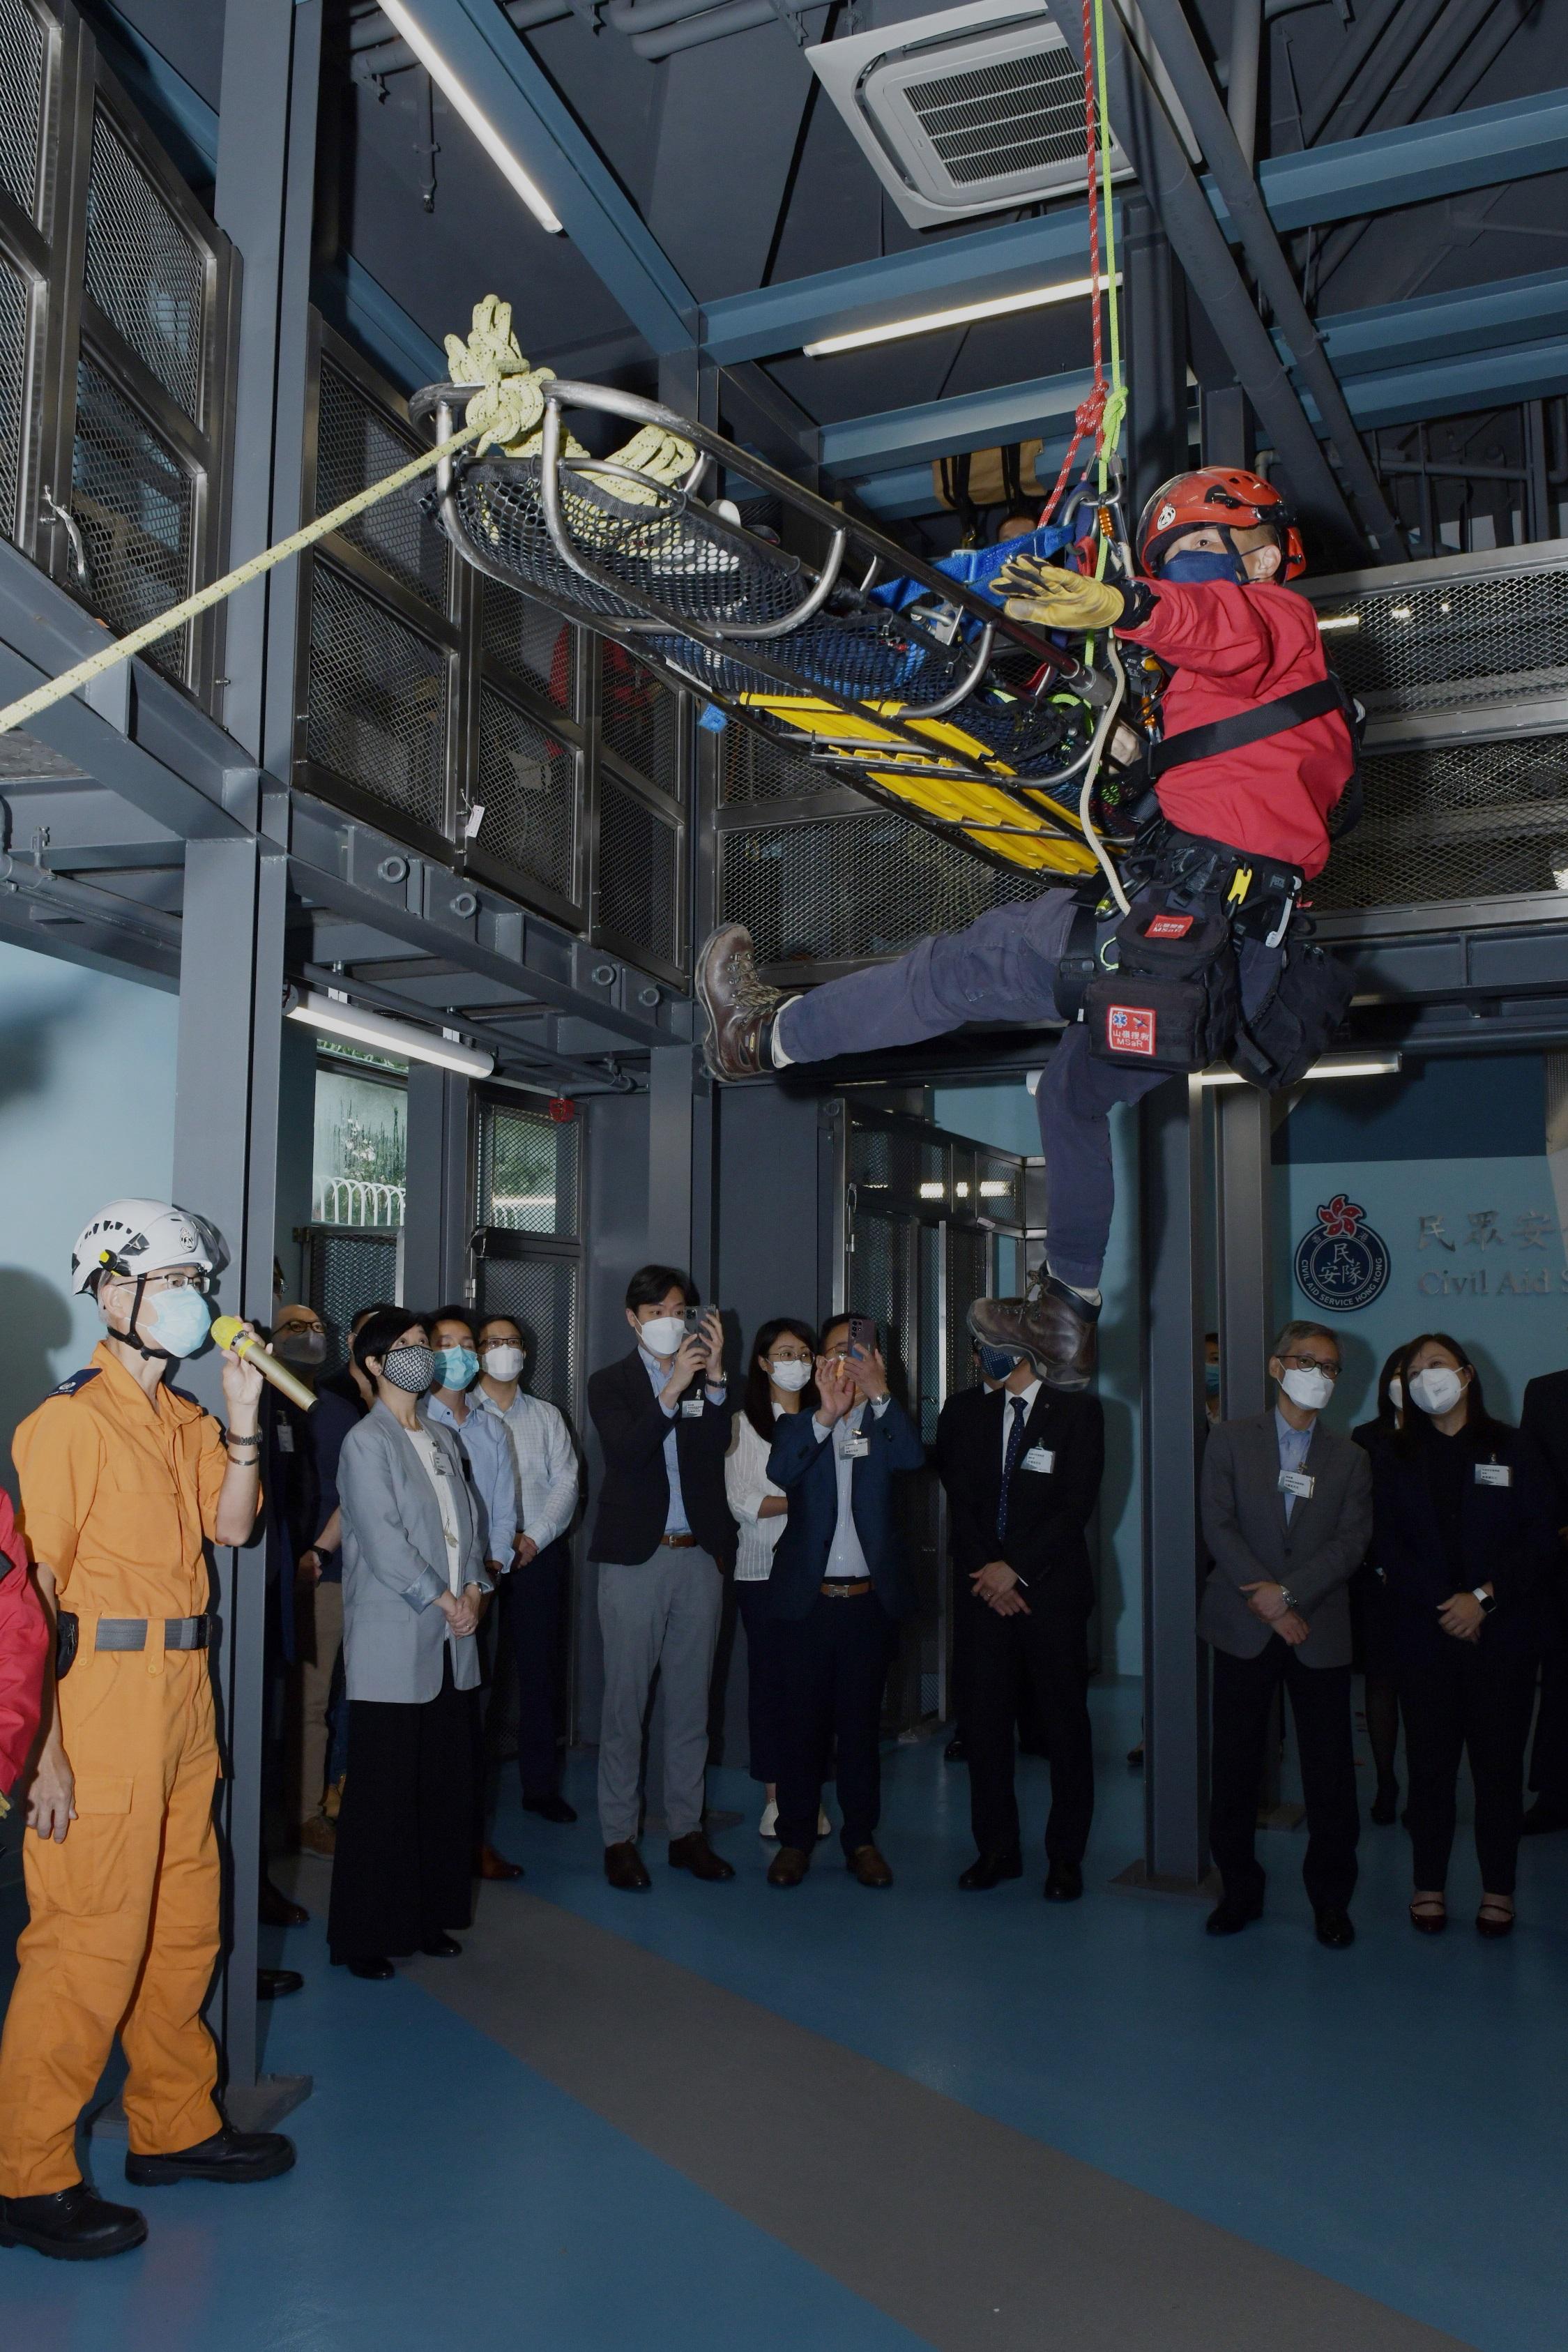 The Opening Ceremony of High-Angle Rescue Training Centre of the Civil Aid Service (CAS) was held today (May 13). Photo shows CAS personnel demonstrating high-angle rescue techniques.